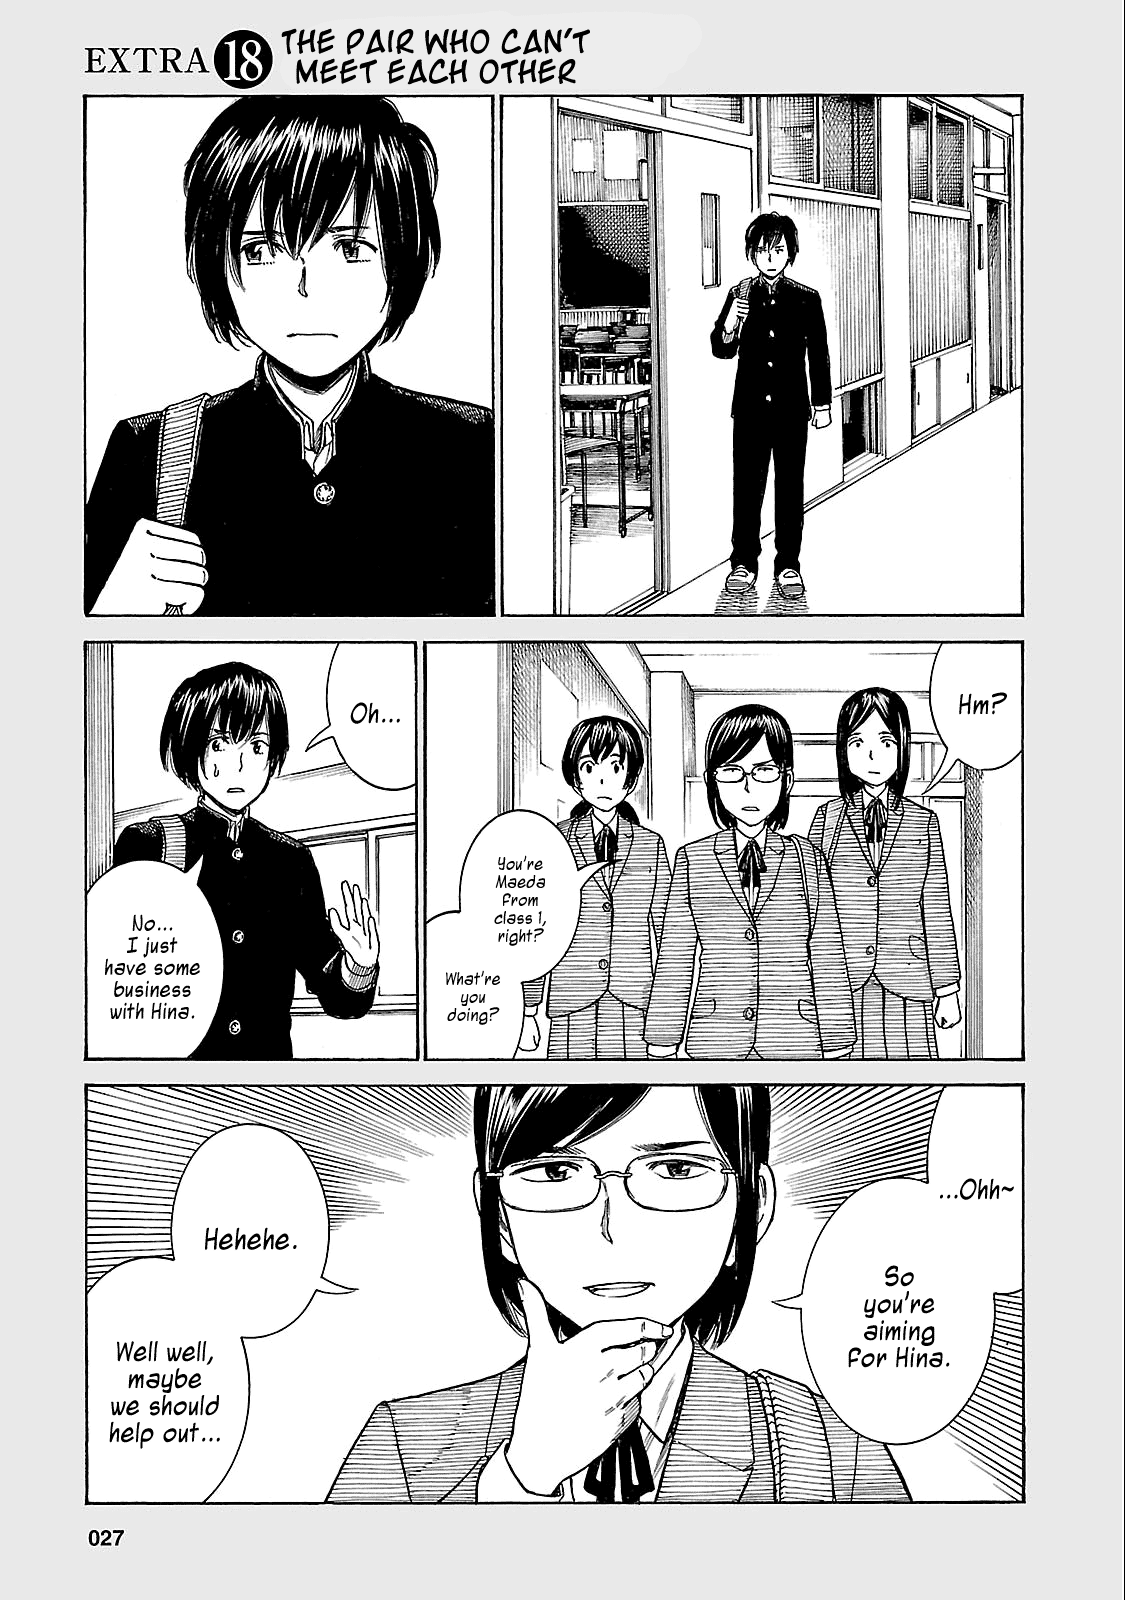 Hinamatsuri Vol.9-Chapter.44.5-The-Pair-Who-Can't-Meet-Each-Other Image